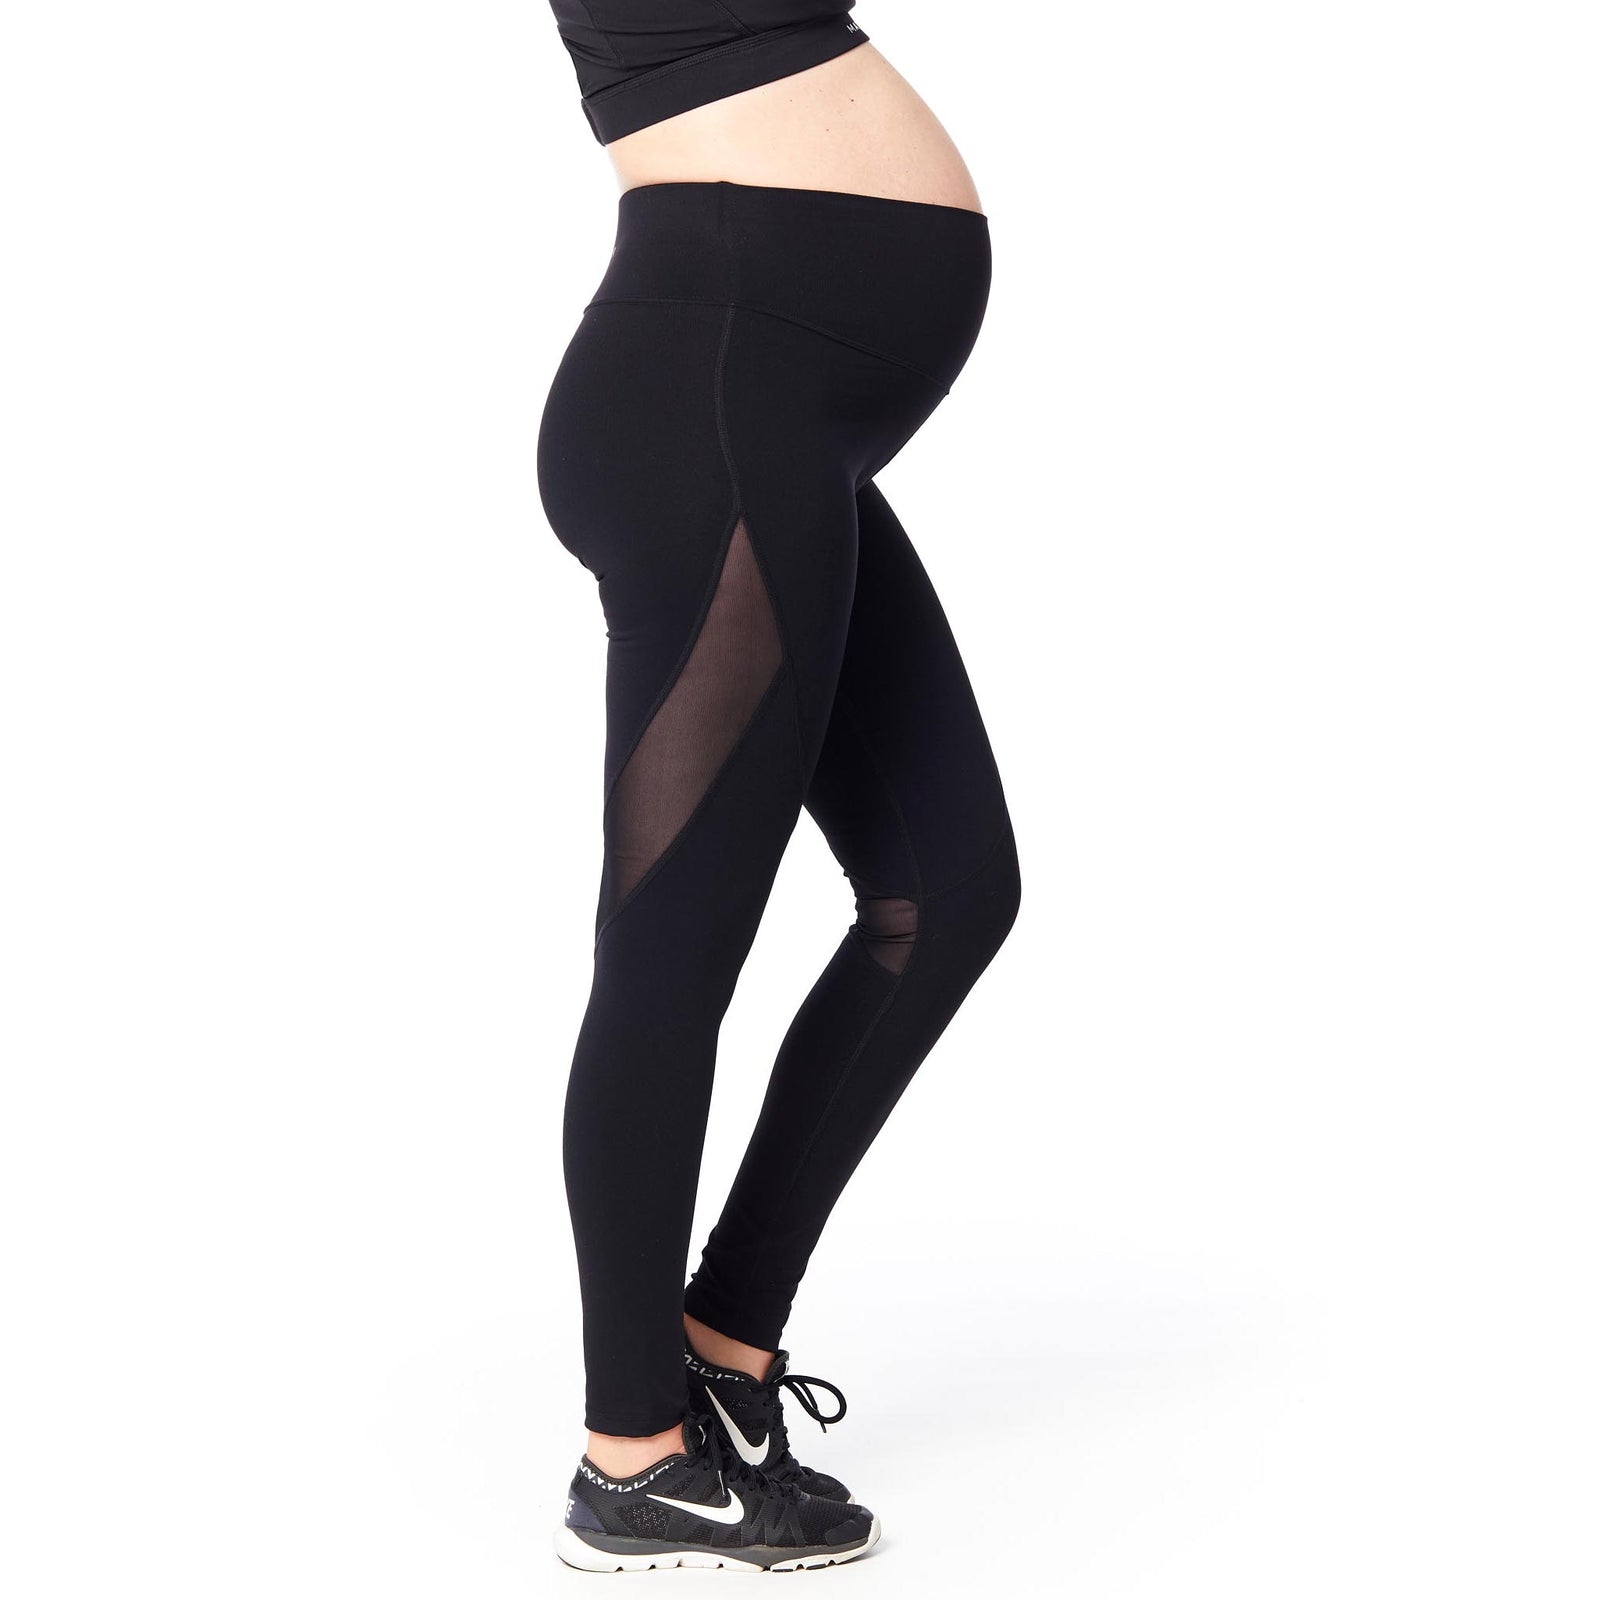 Joyaria Maternity Leggings Over The Belly Ultra Soft Stretchy Full Length  Active Workout Yoga Pregnancy Pants Petite (Black, Small) at  Women's  Clothing store